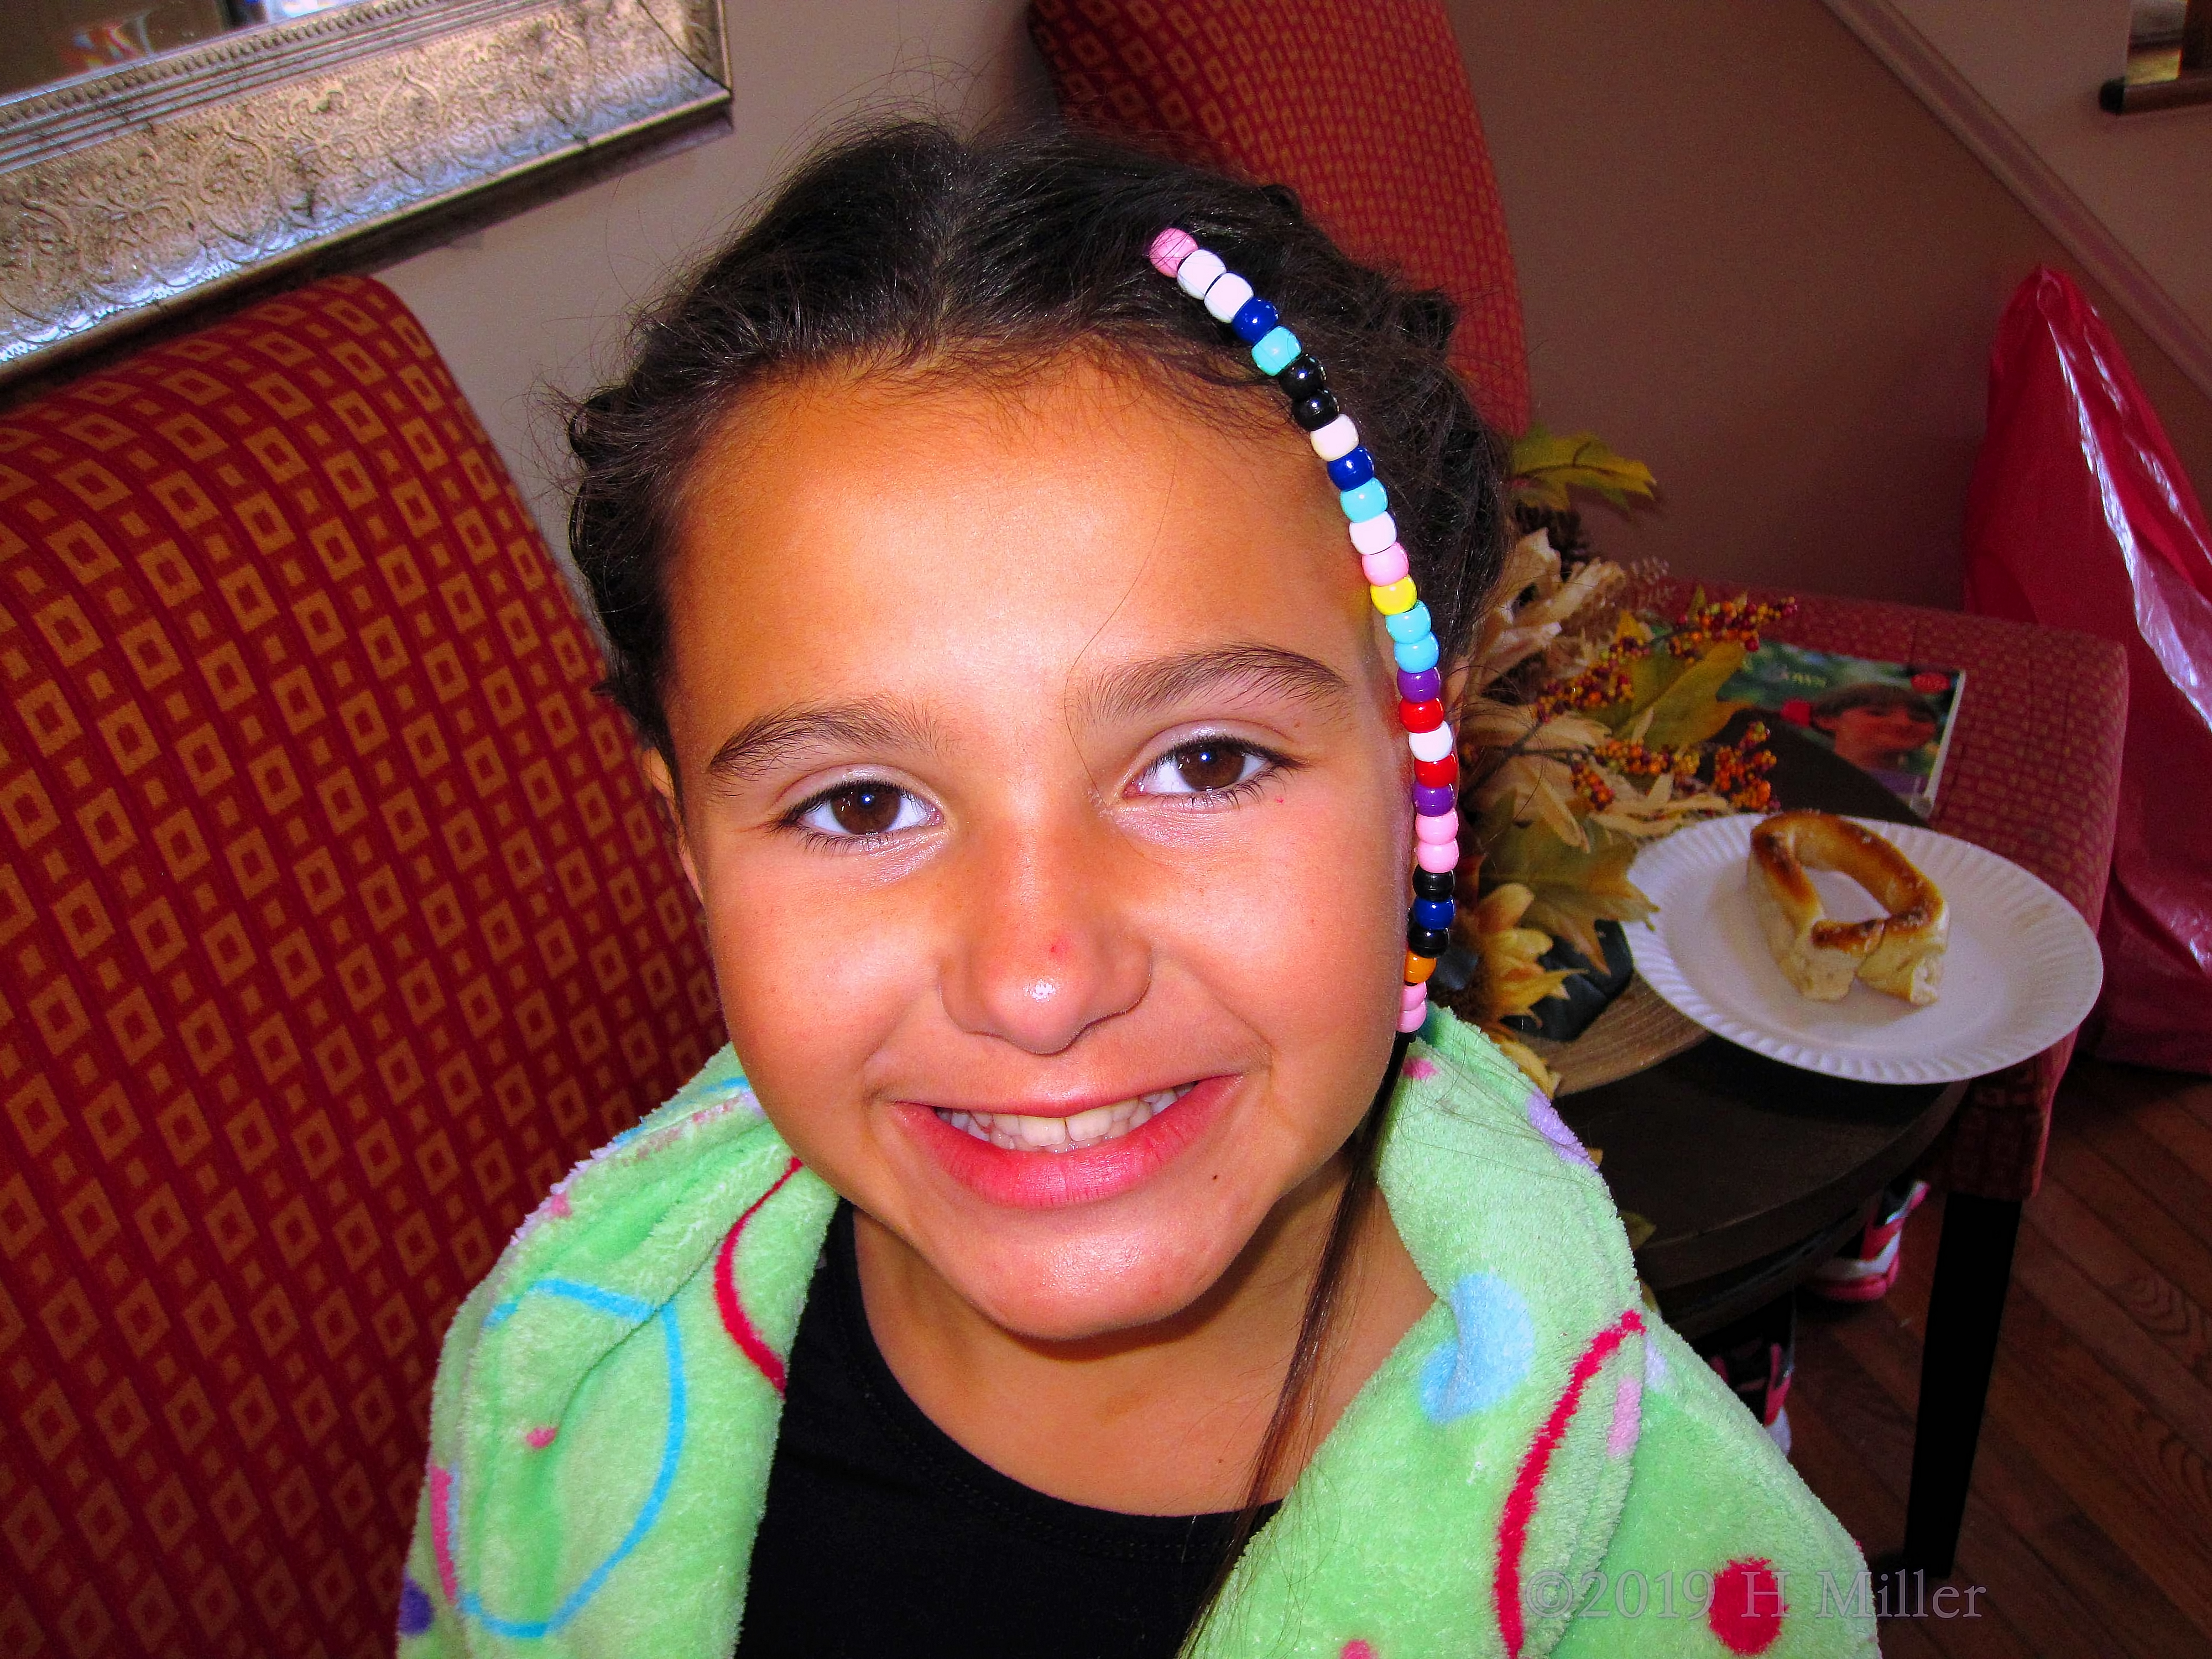 Beaming In Beads! Party Guest Shows Off Kids Hairstyle With Beads! 